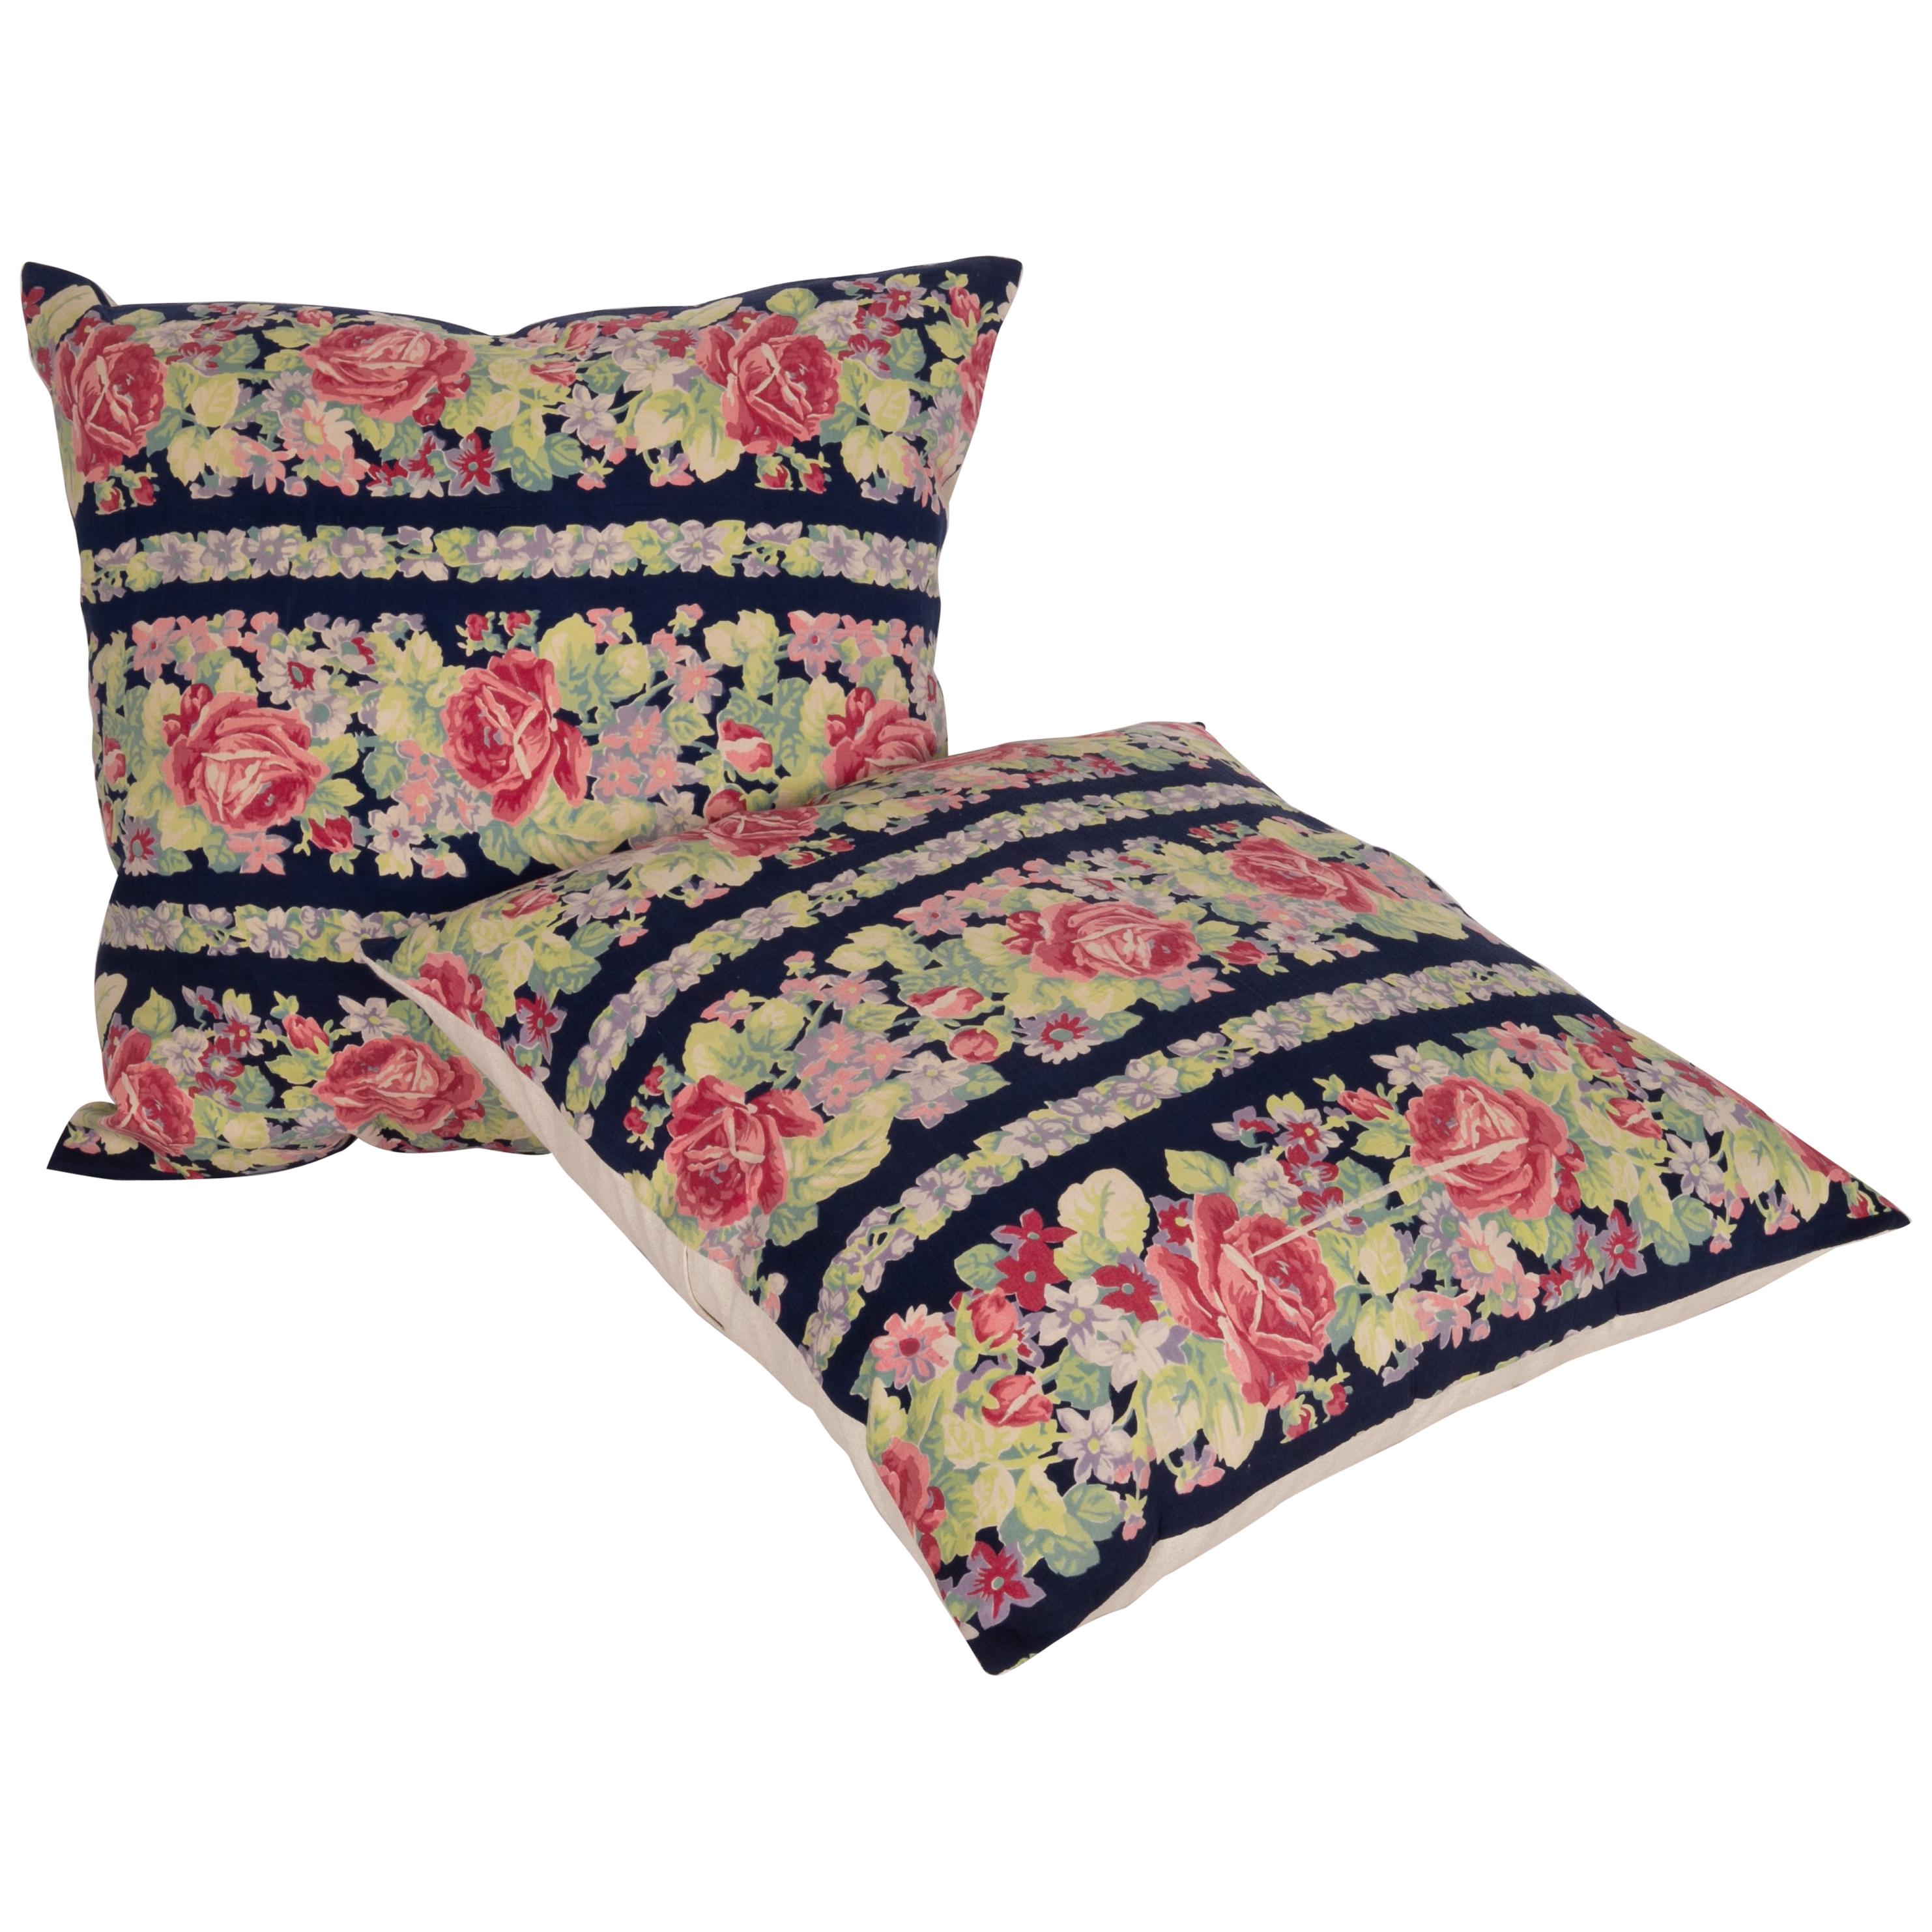 Pillow Cases Made from Mid-20th Century Russian Cotton Printed Textile, 1960s For Sale